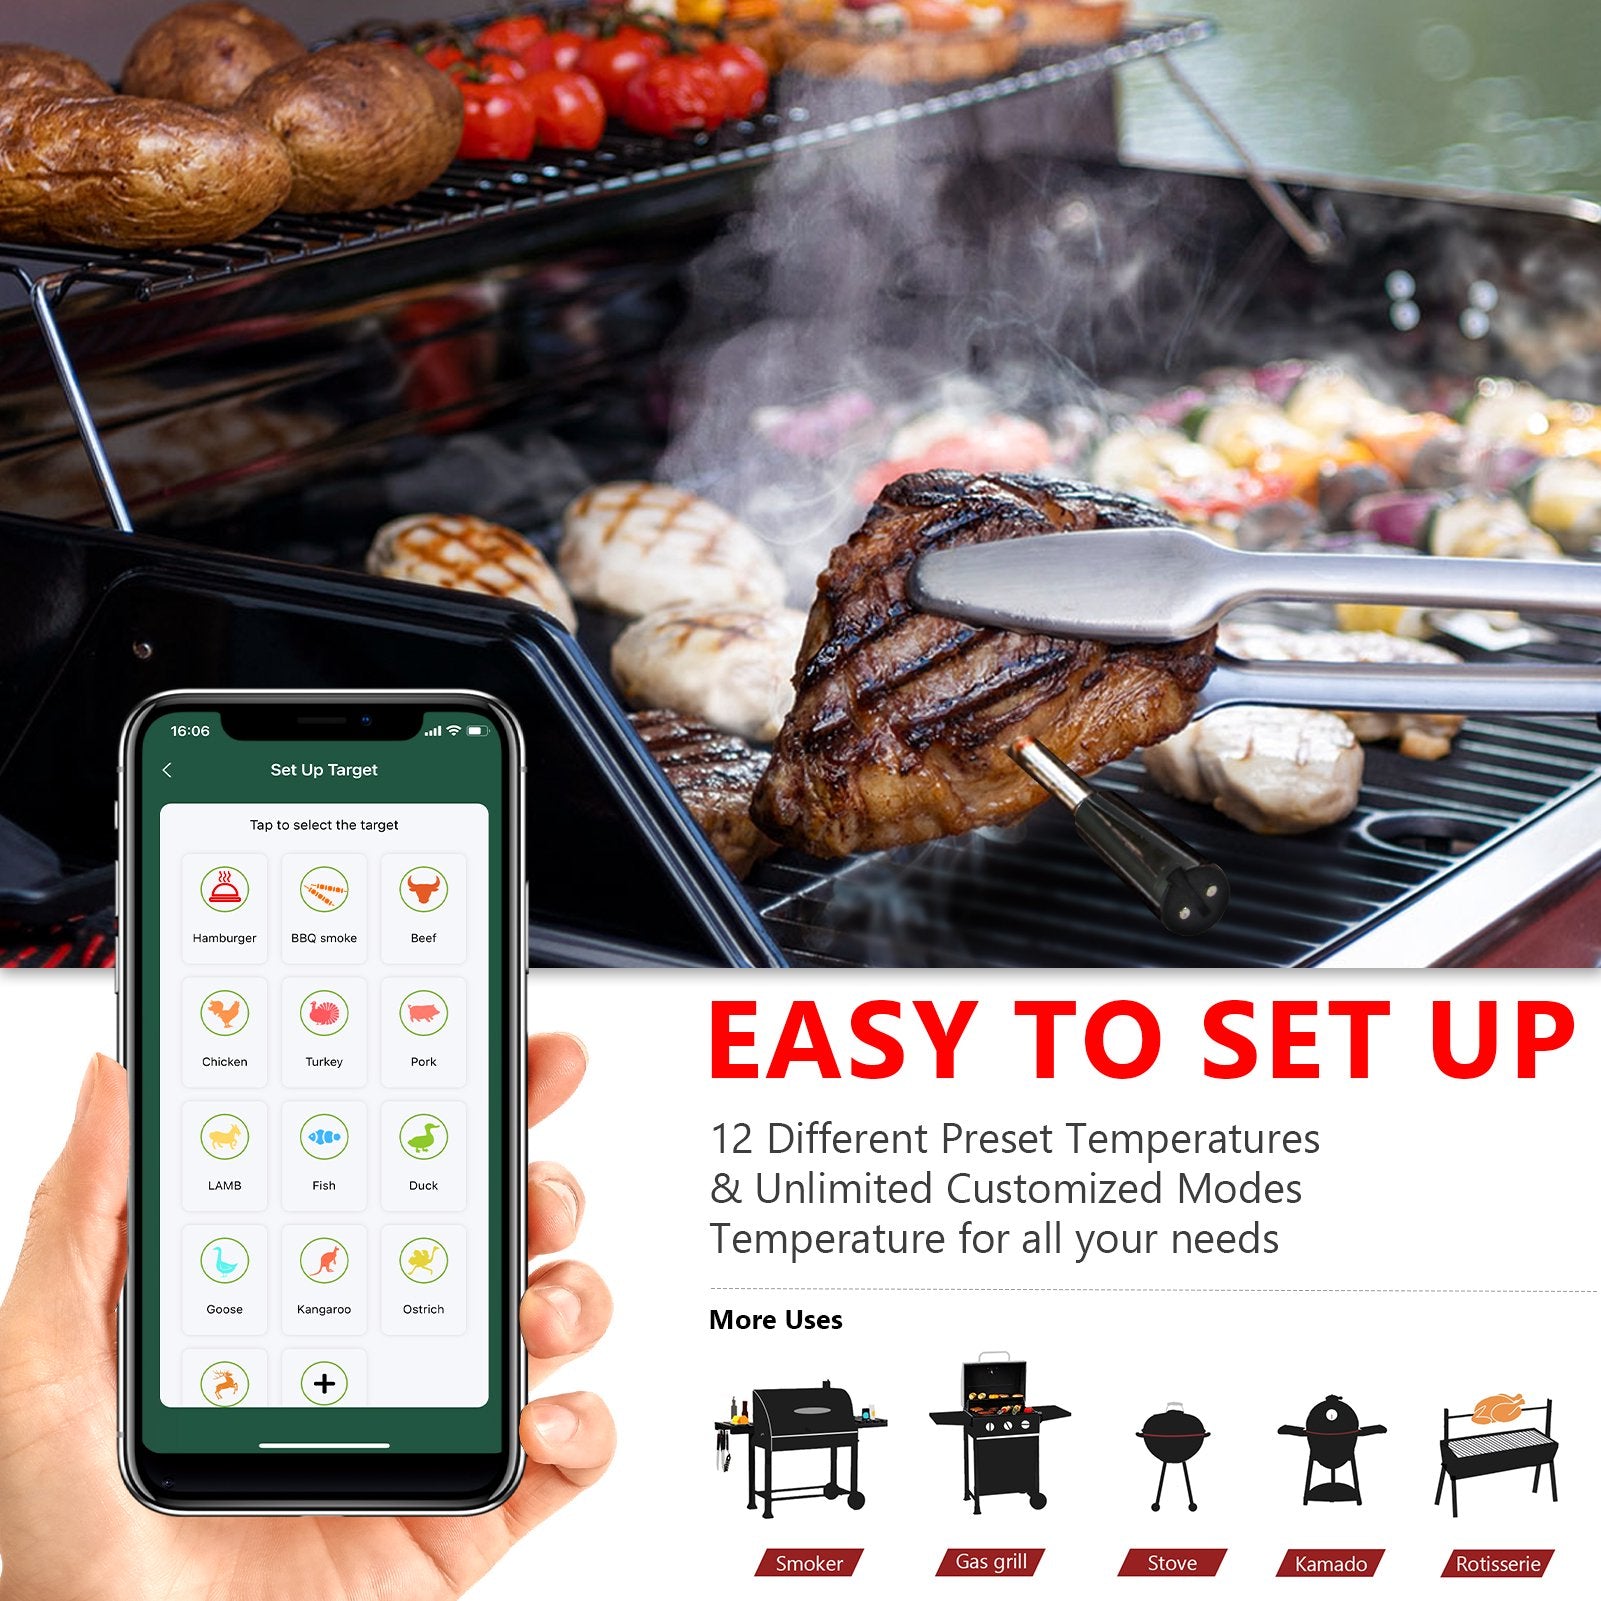 Wireless Meat Thermometer Bluetooth Unlimited Range Thermometer Digital  Meat Thermometer Wireless for Remote Monitoring Kitchen BBQ Oven Smoker  Grill